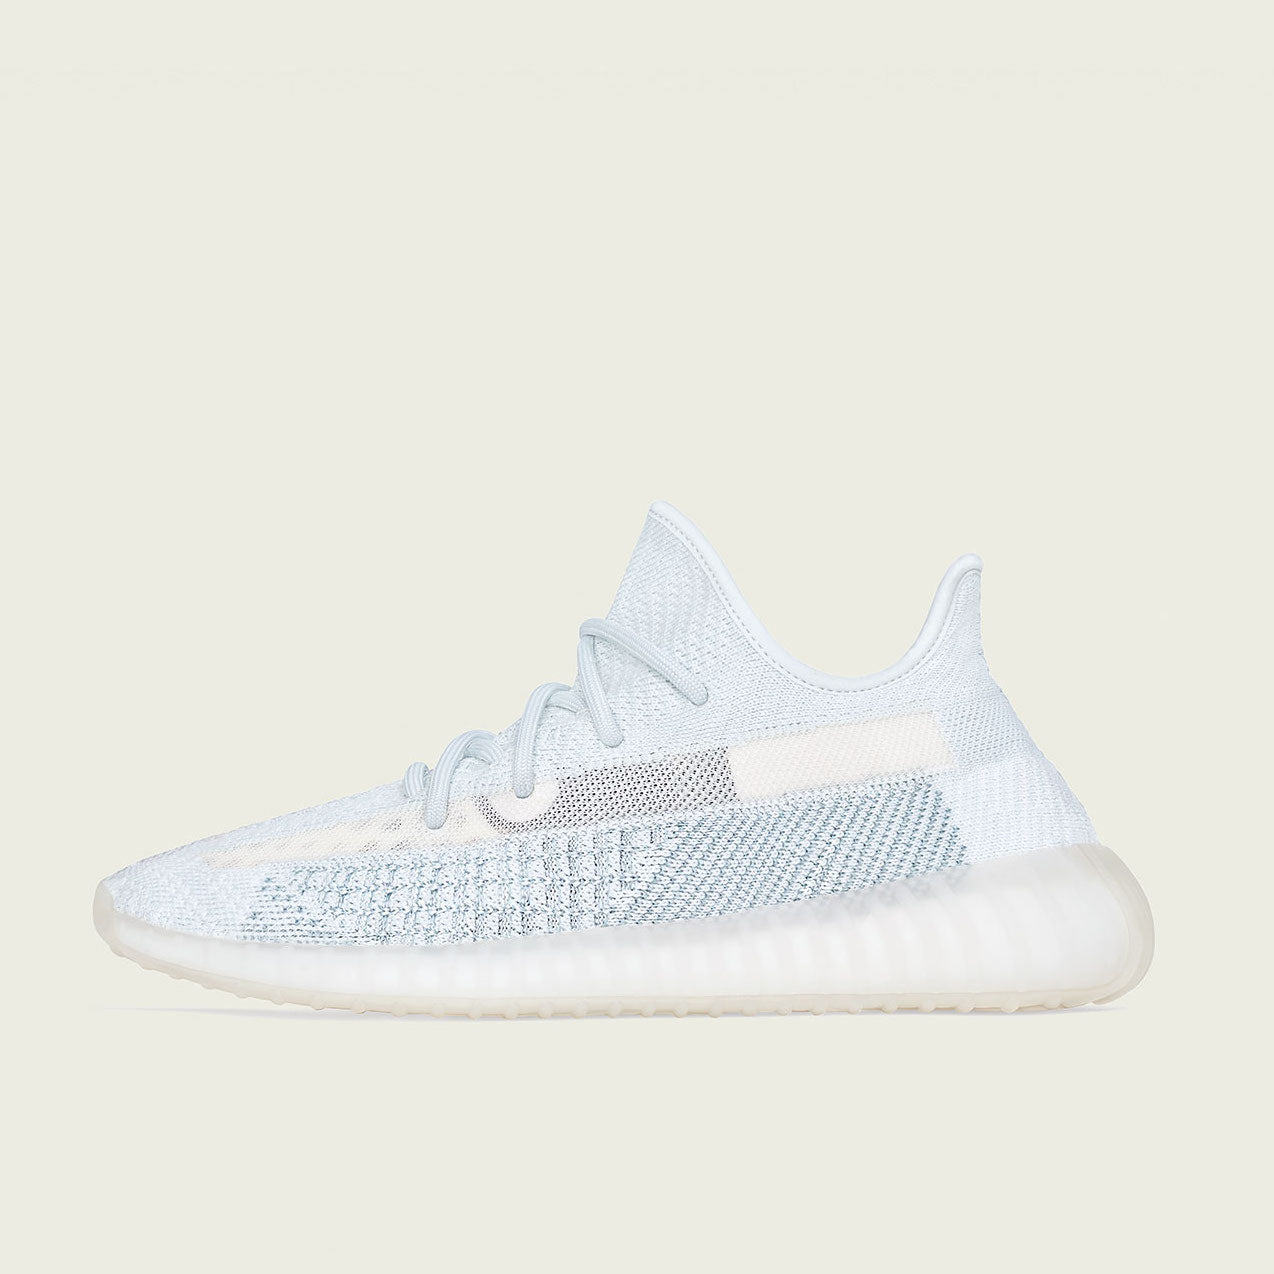 adidas yeezy boost 350 v2 price in philippines